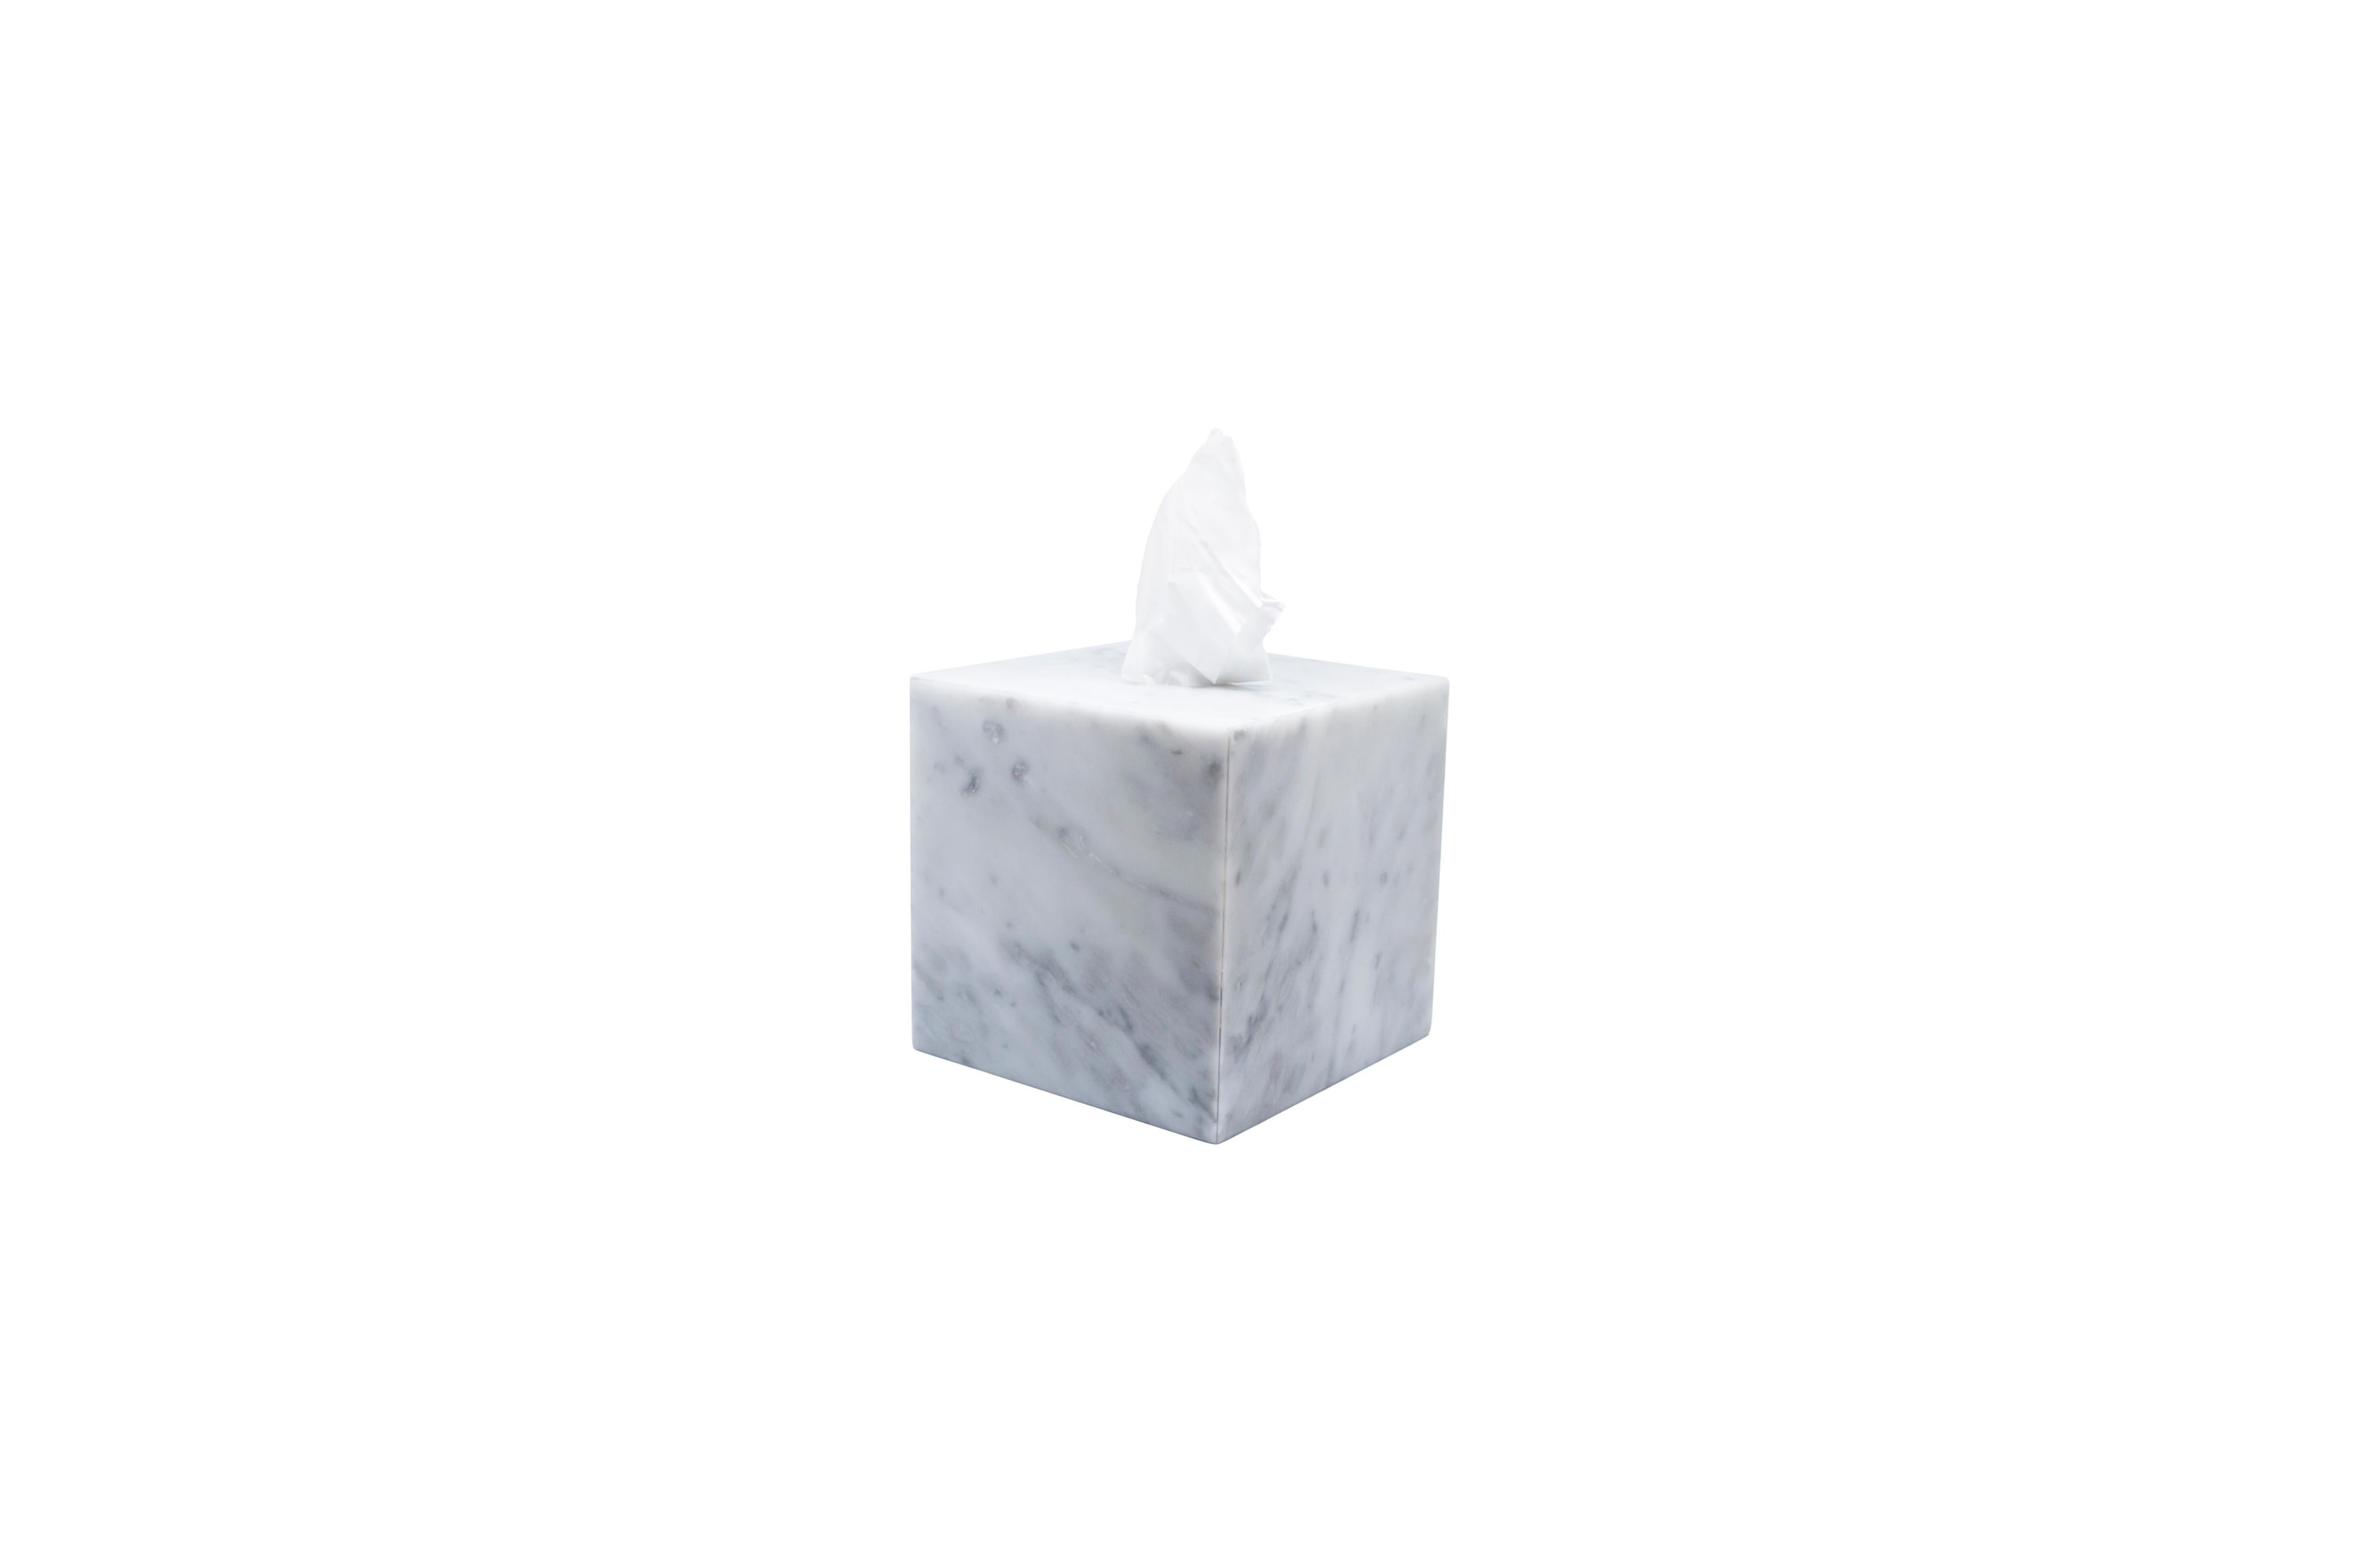 Squared tissues cover box in glossy white Carrara marble. Available also in grey or black marble.
Each piece is in a way unique (every marble block is different in veins and shades) and handmade by Italian artisans specialized over generations in